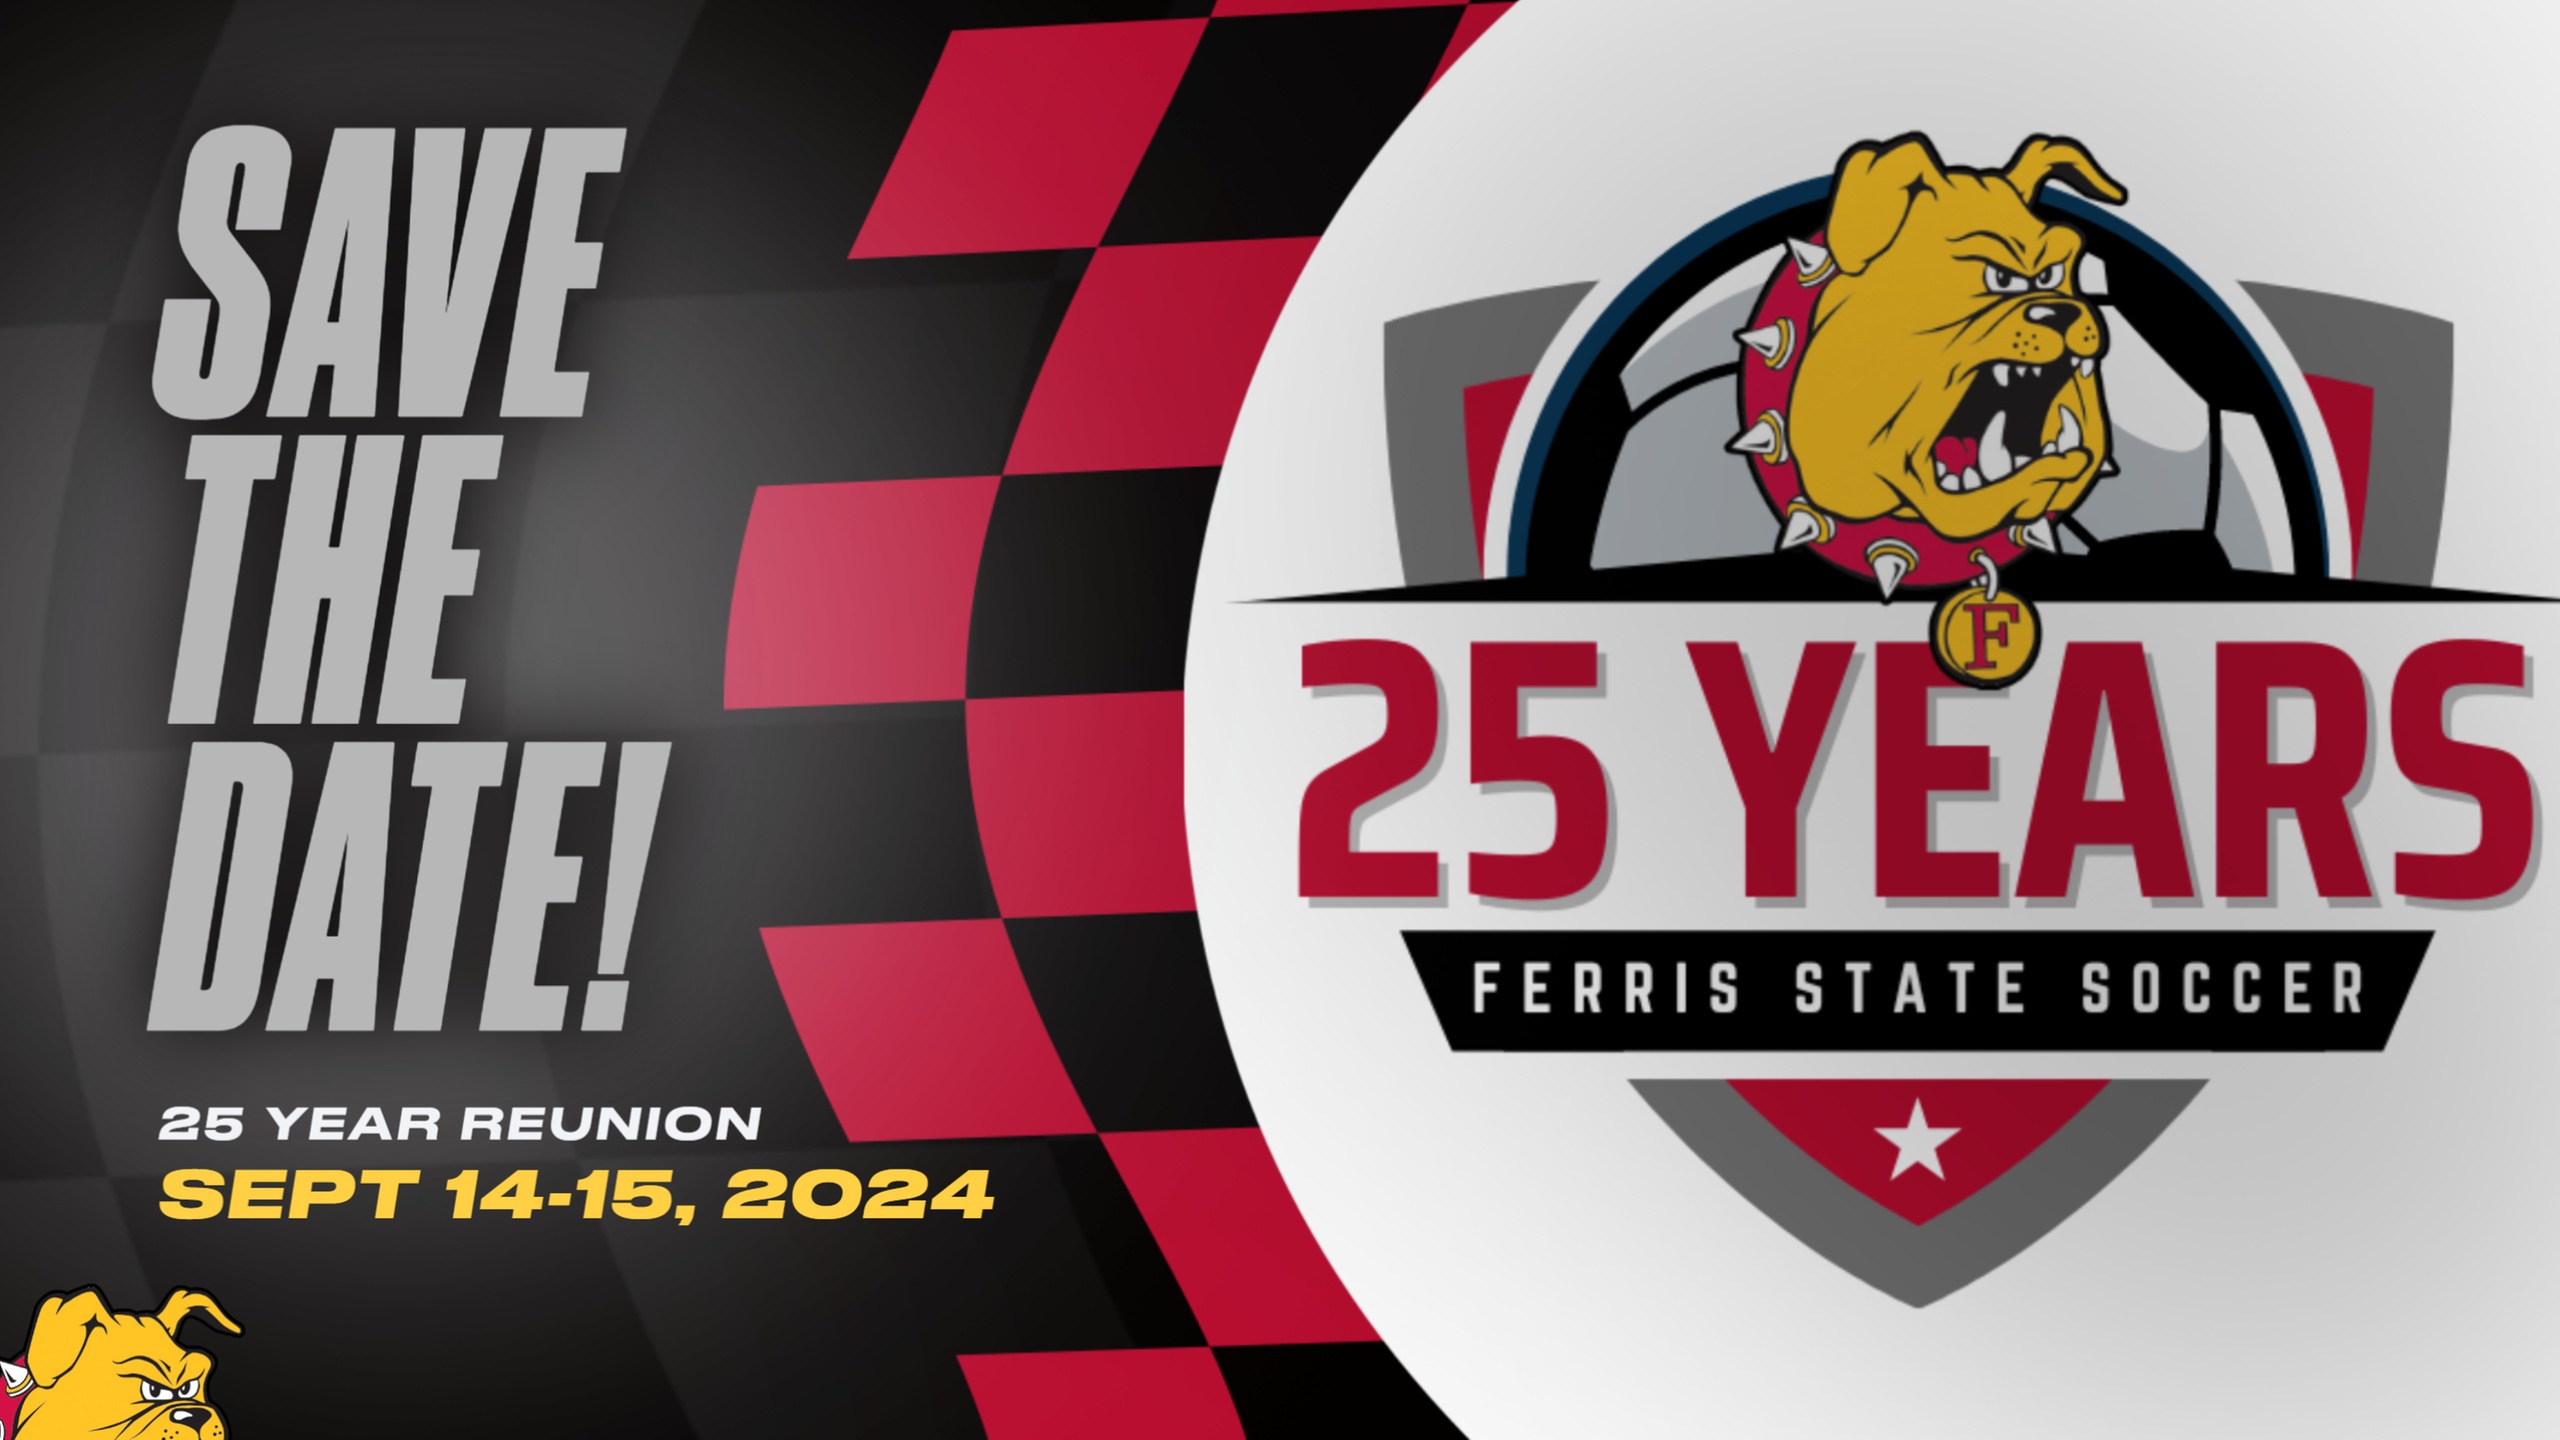 Ferris State Soccer To Celebrate 25th Anniversary With Special Celebration This Fall